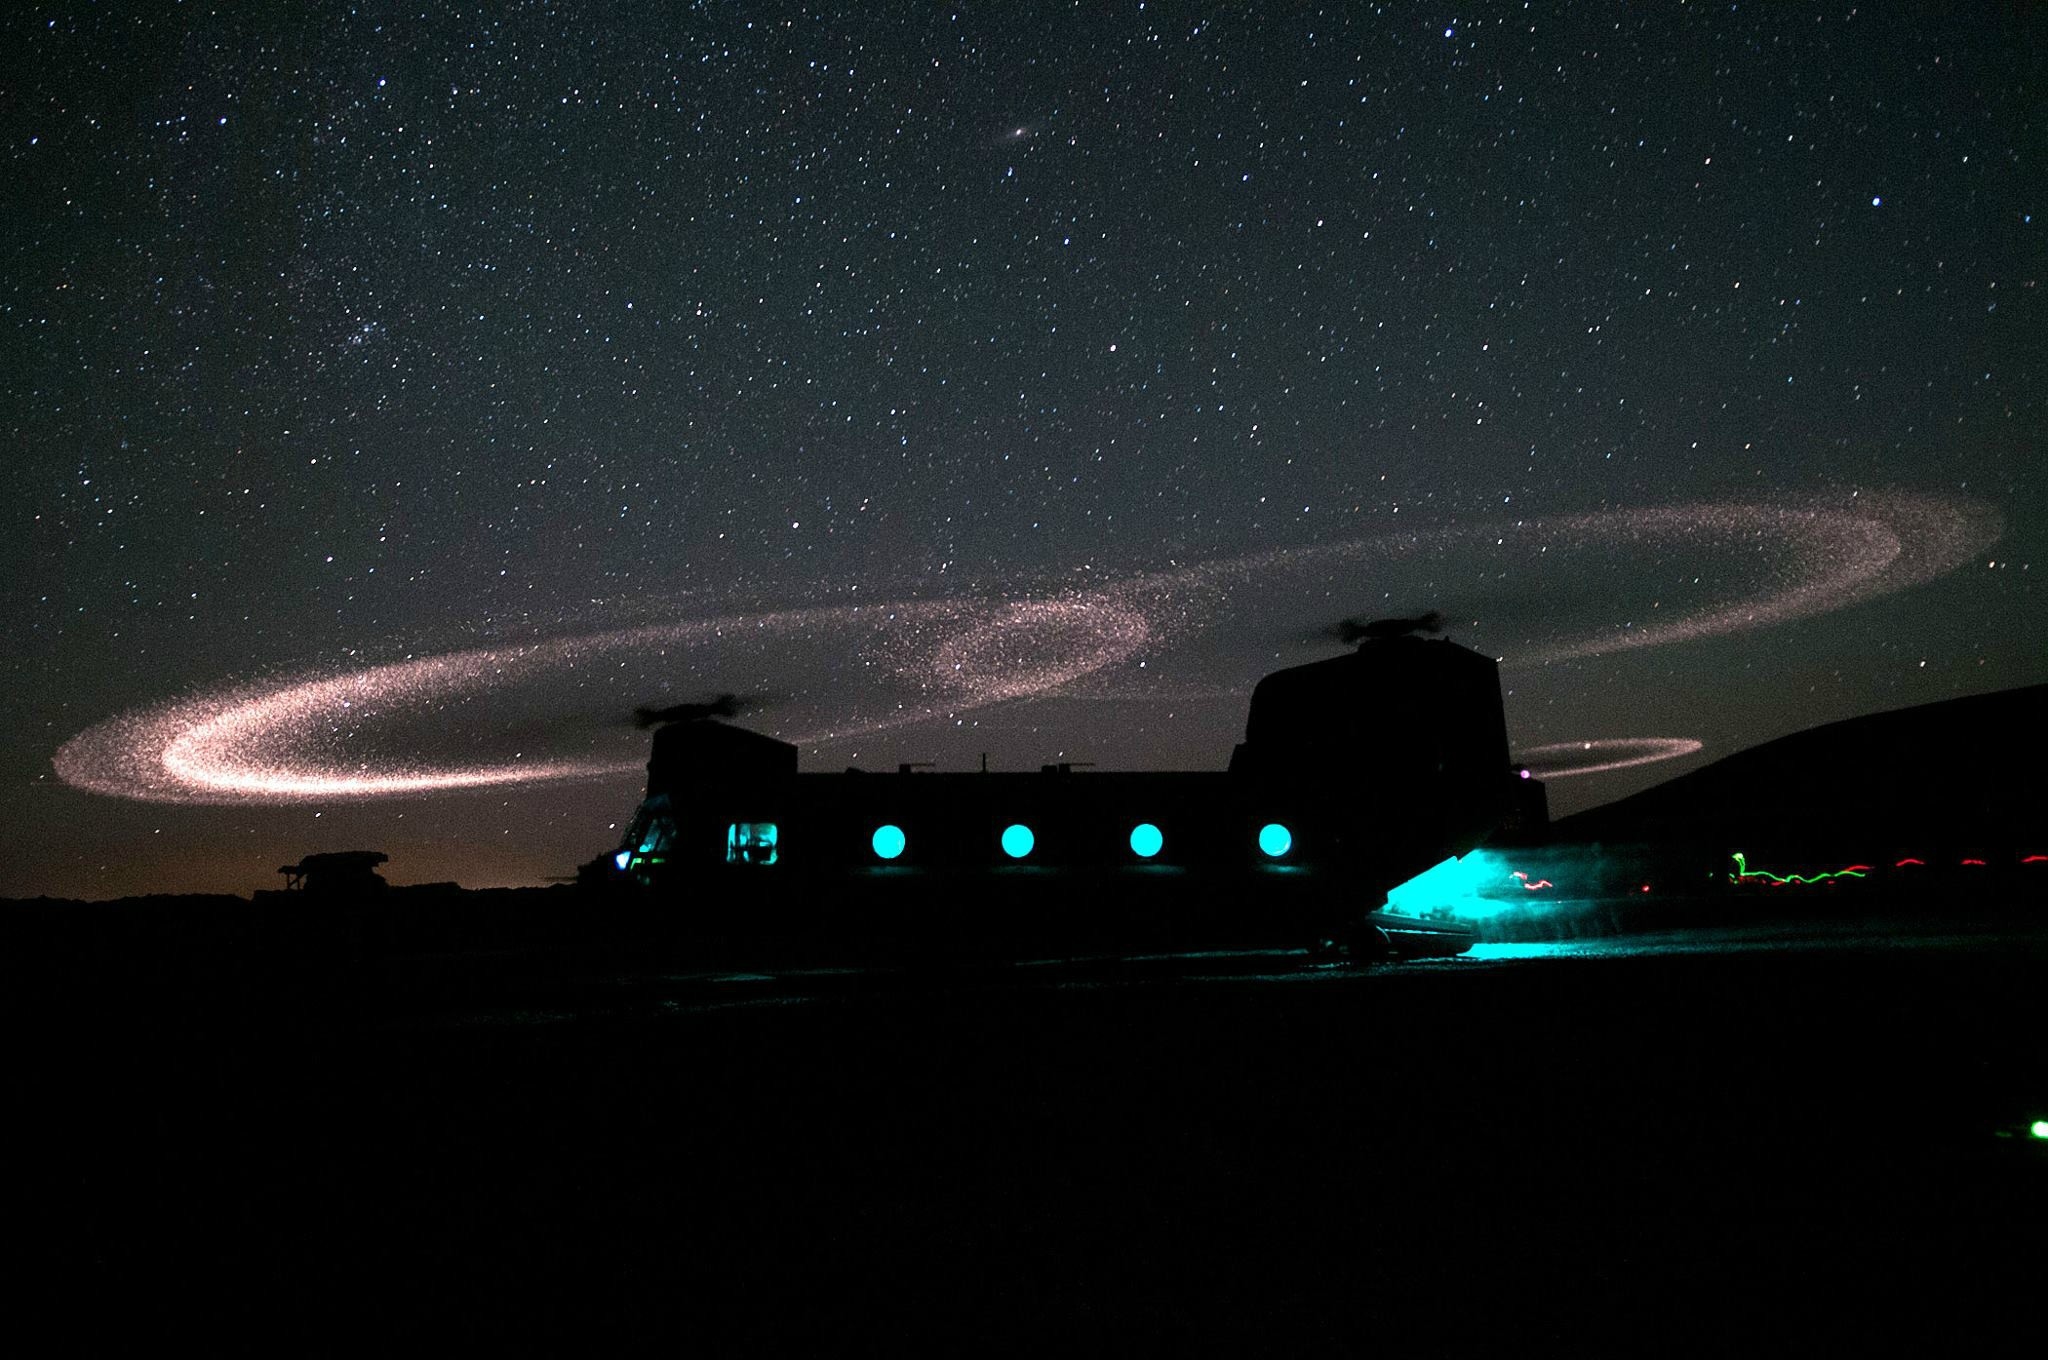 CH-47_Chinook_helicopter_Night_Sky_Master.jpg